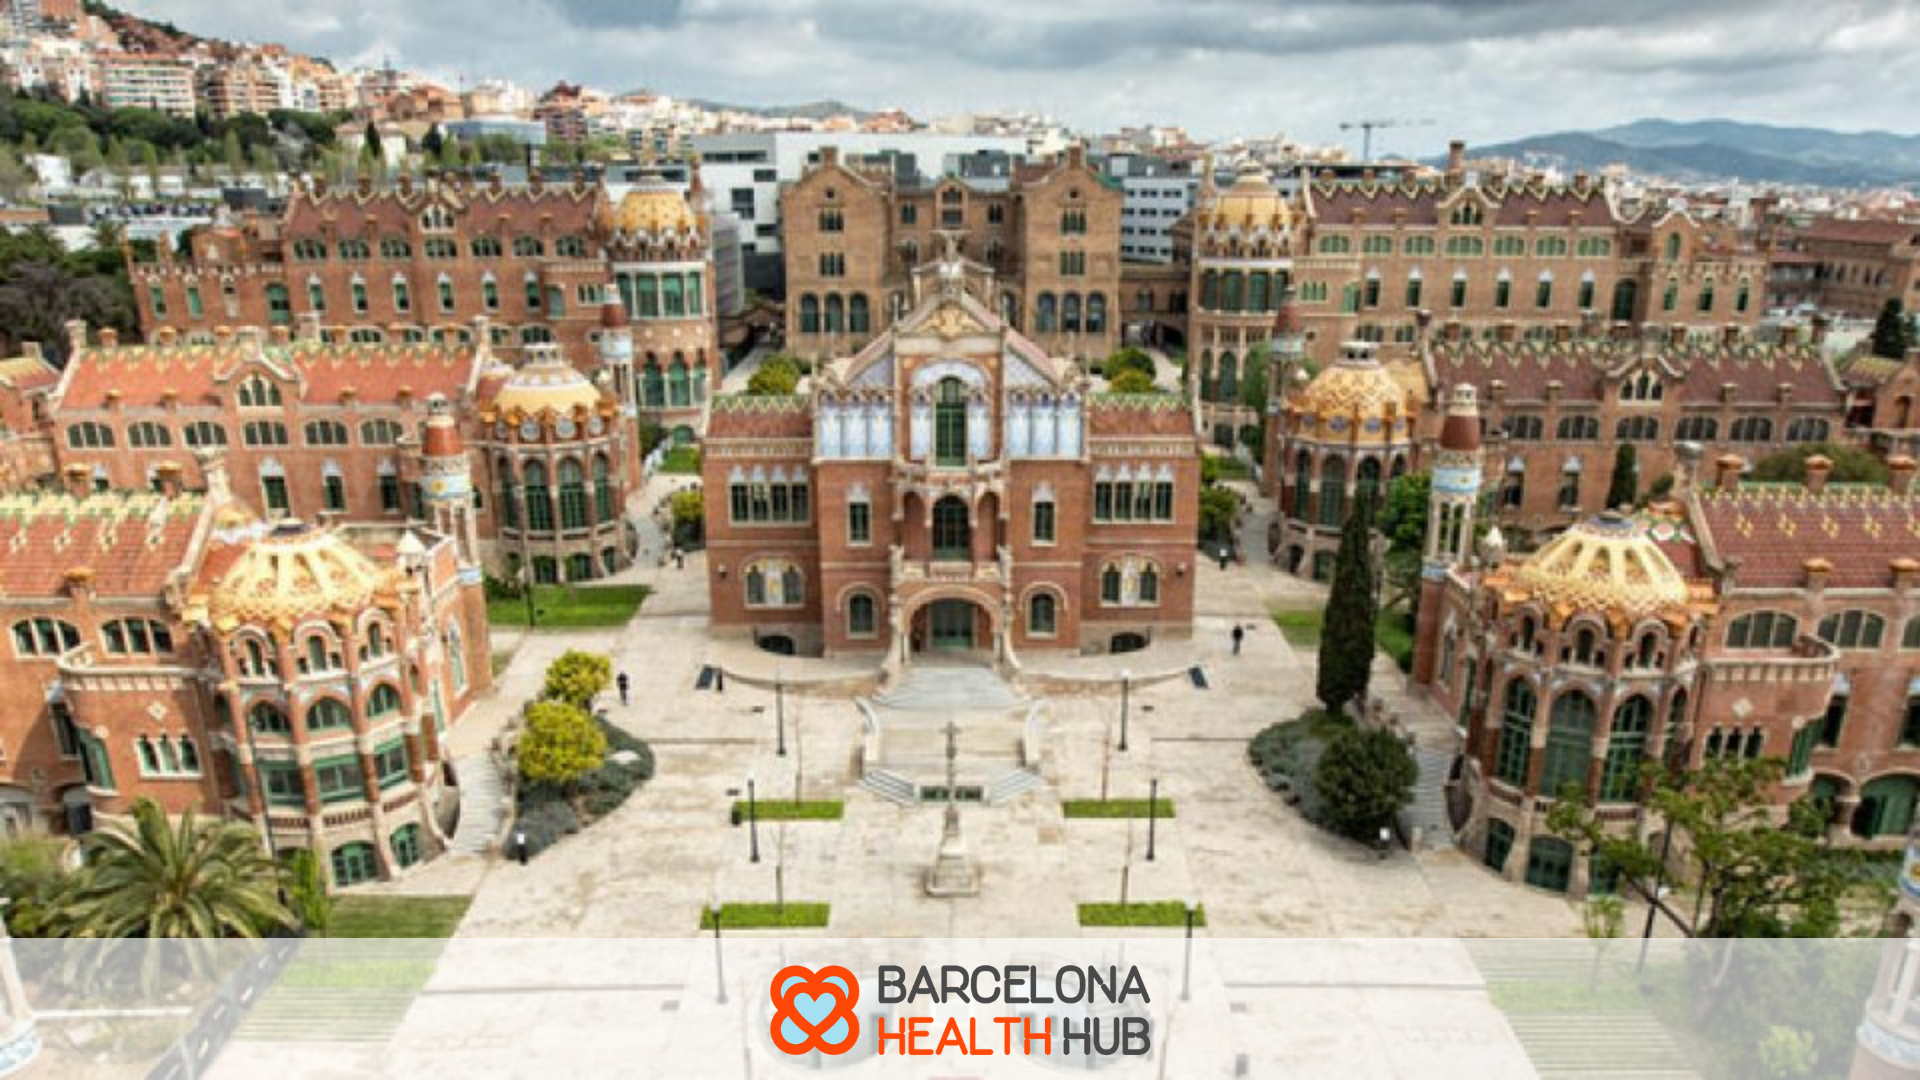 Barcelona Health Hub expands its Headquarters: Fundació Sant Pau renovates one of the pavilions of the Recinte Modernista for BHH